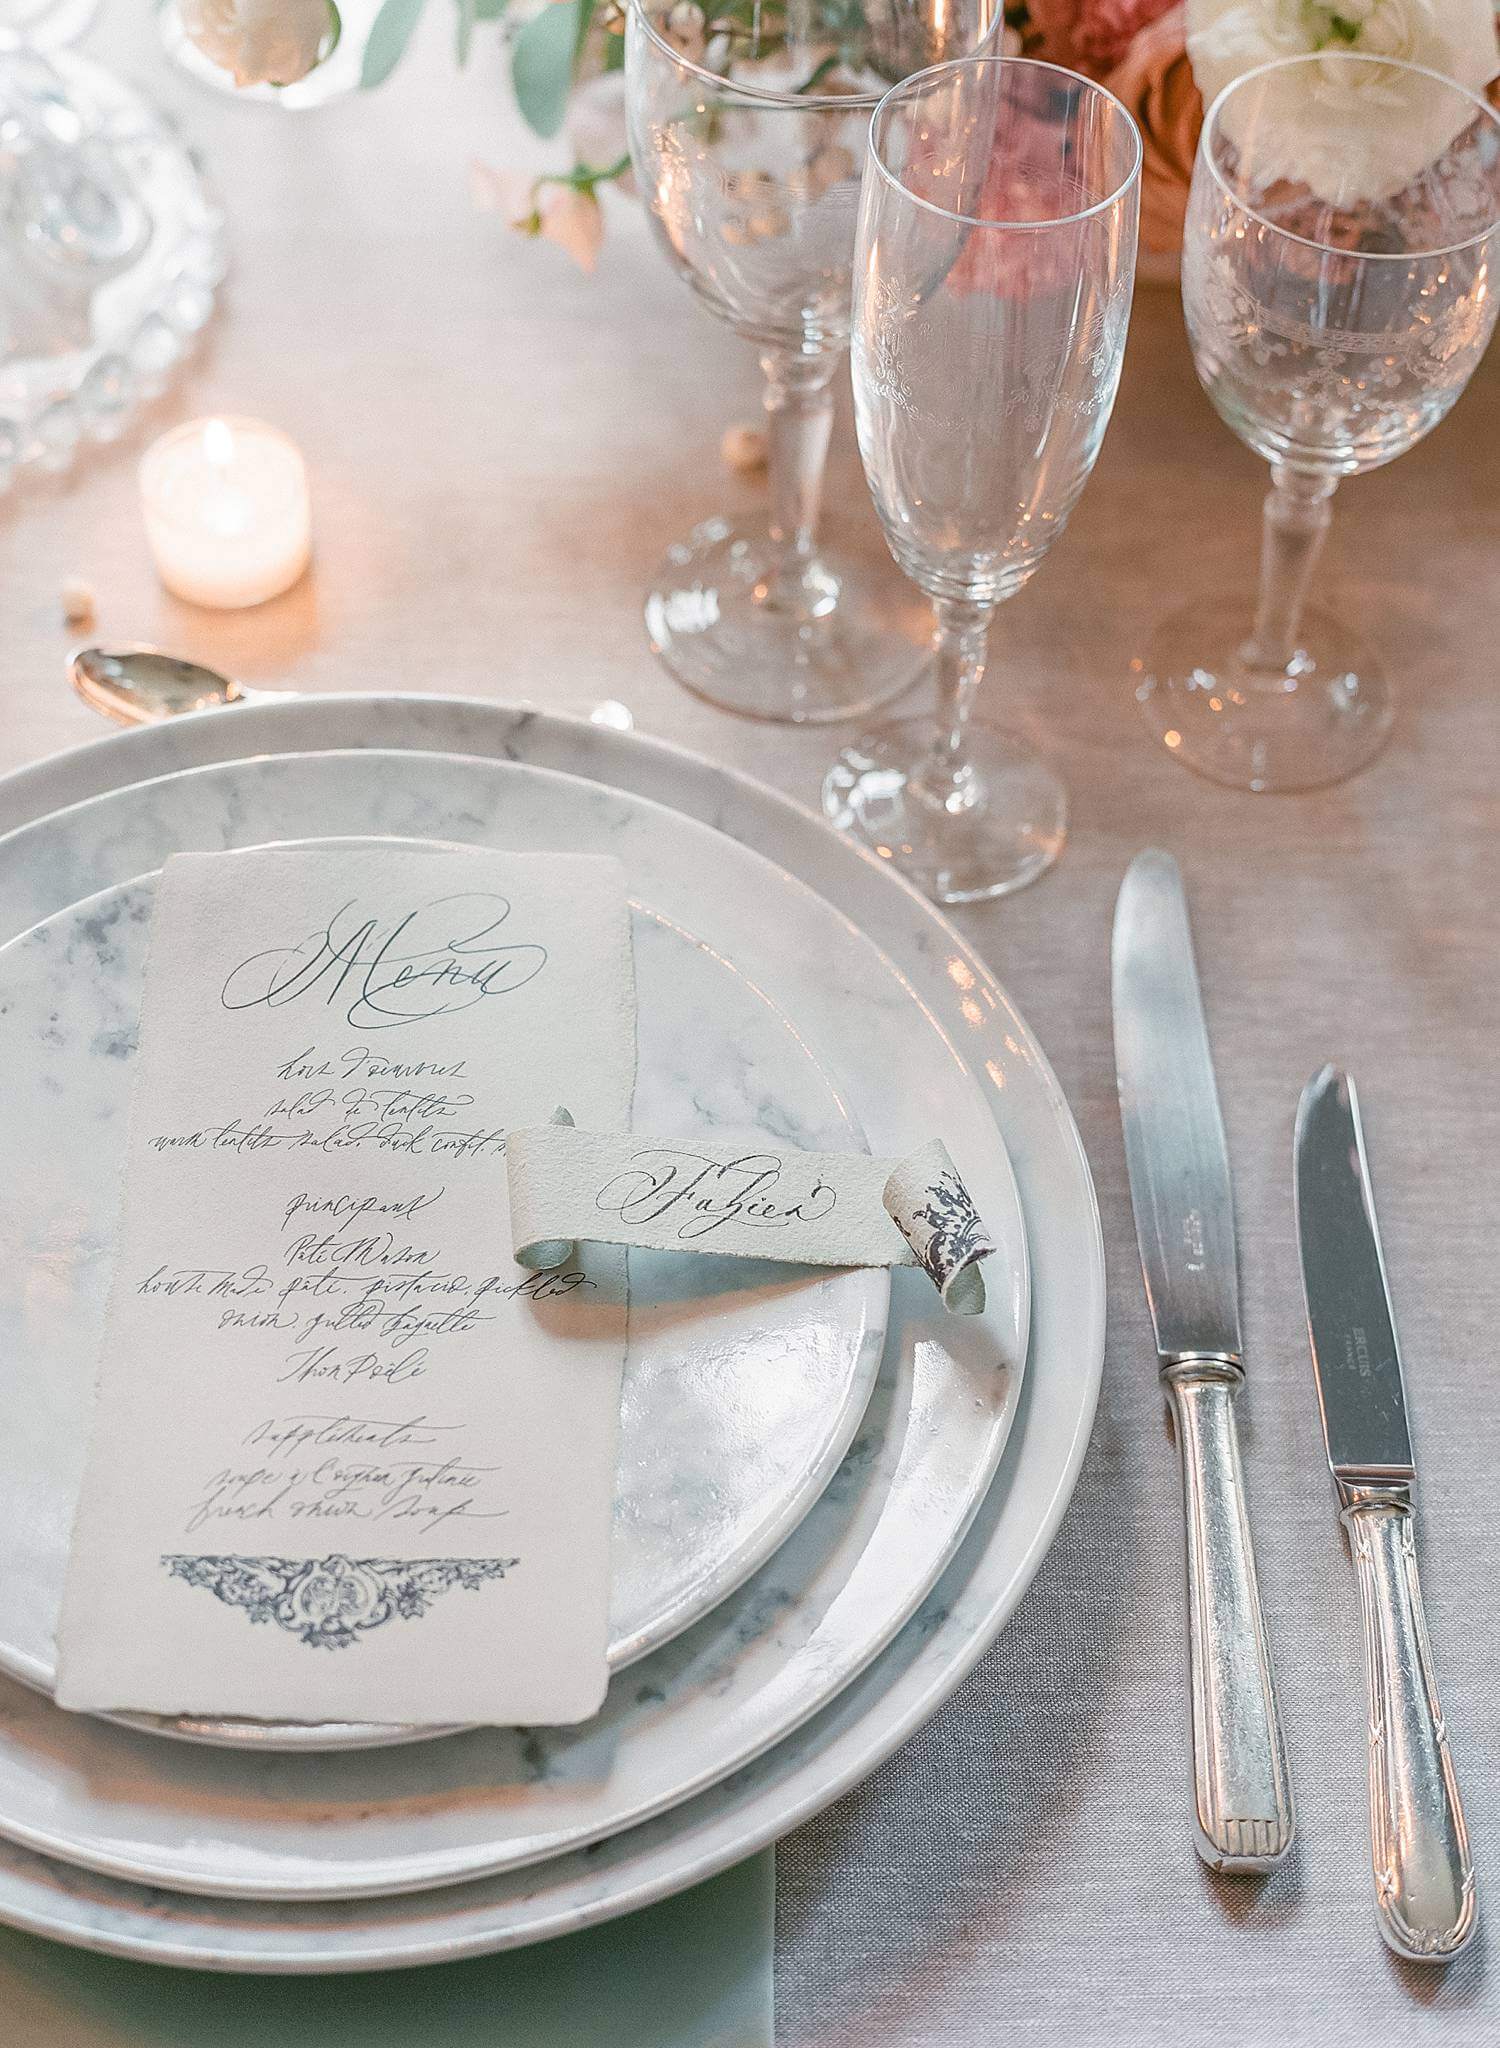 Table details of hand written menus and place cards at reception for an elopement at Chateau Couffins in Bordeaux France